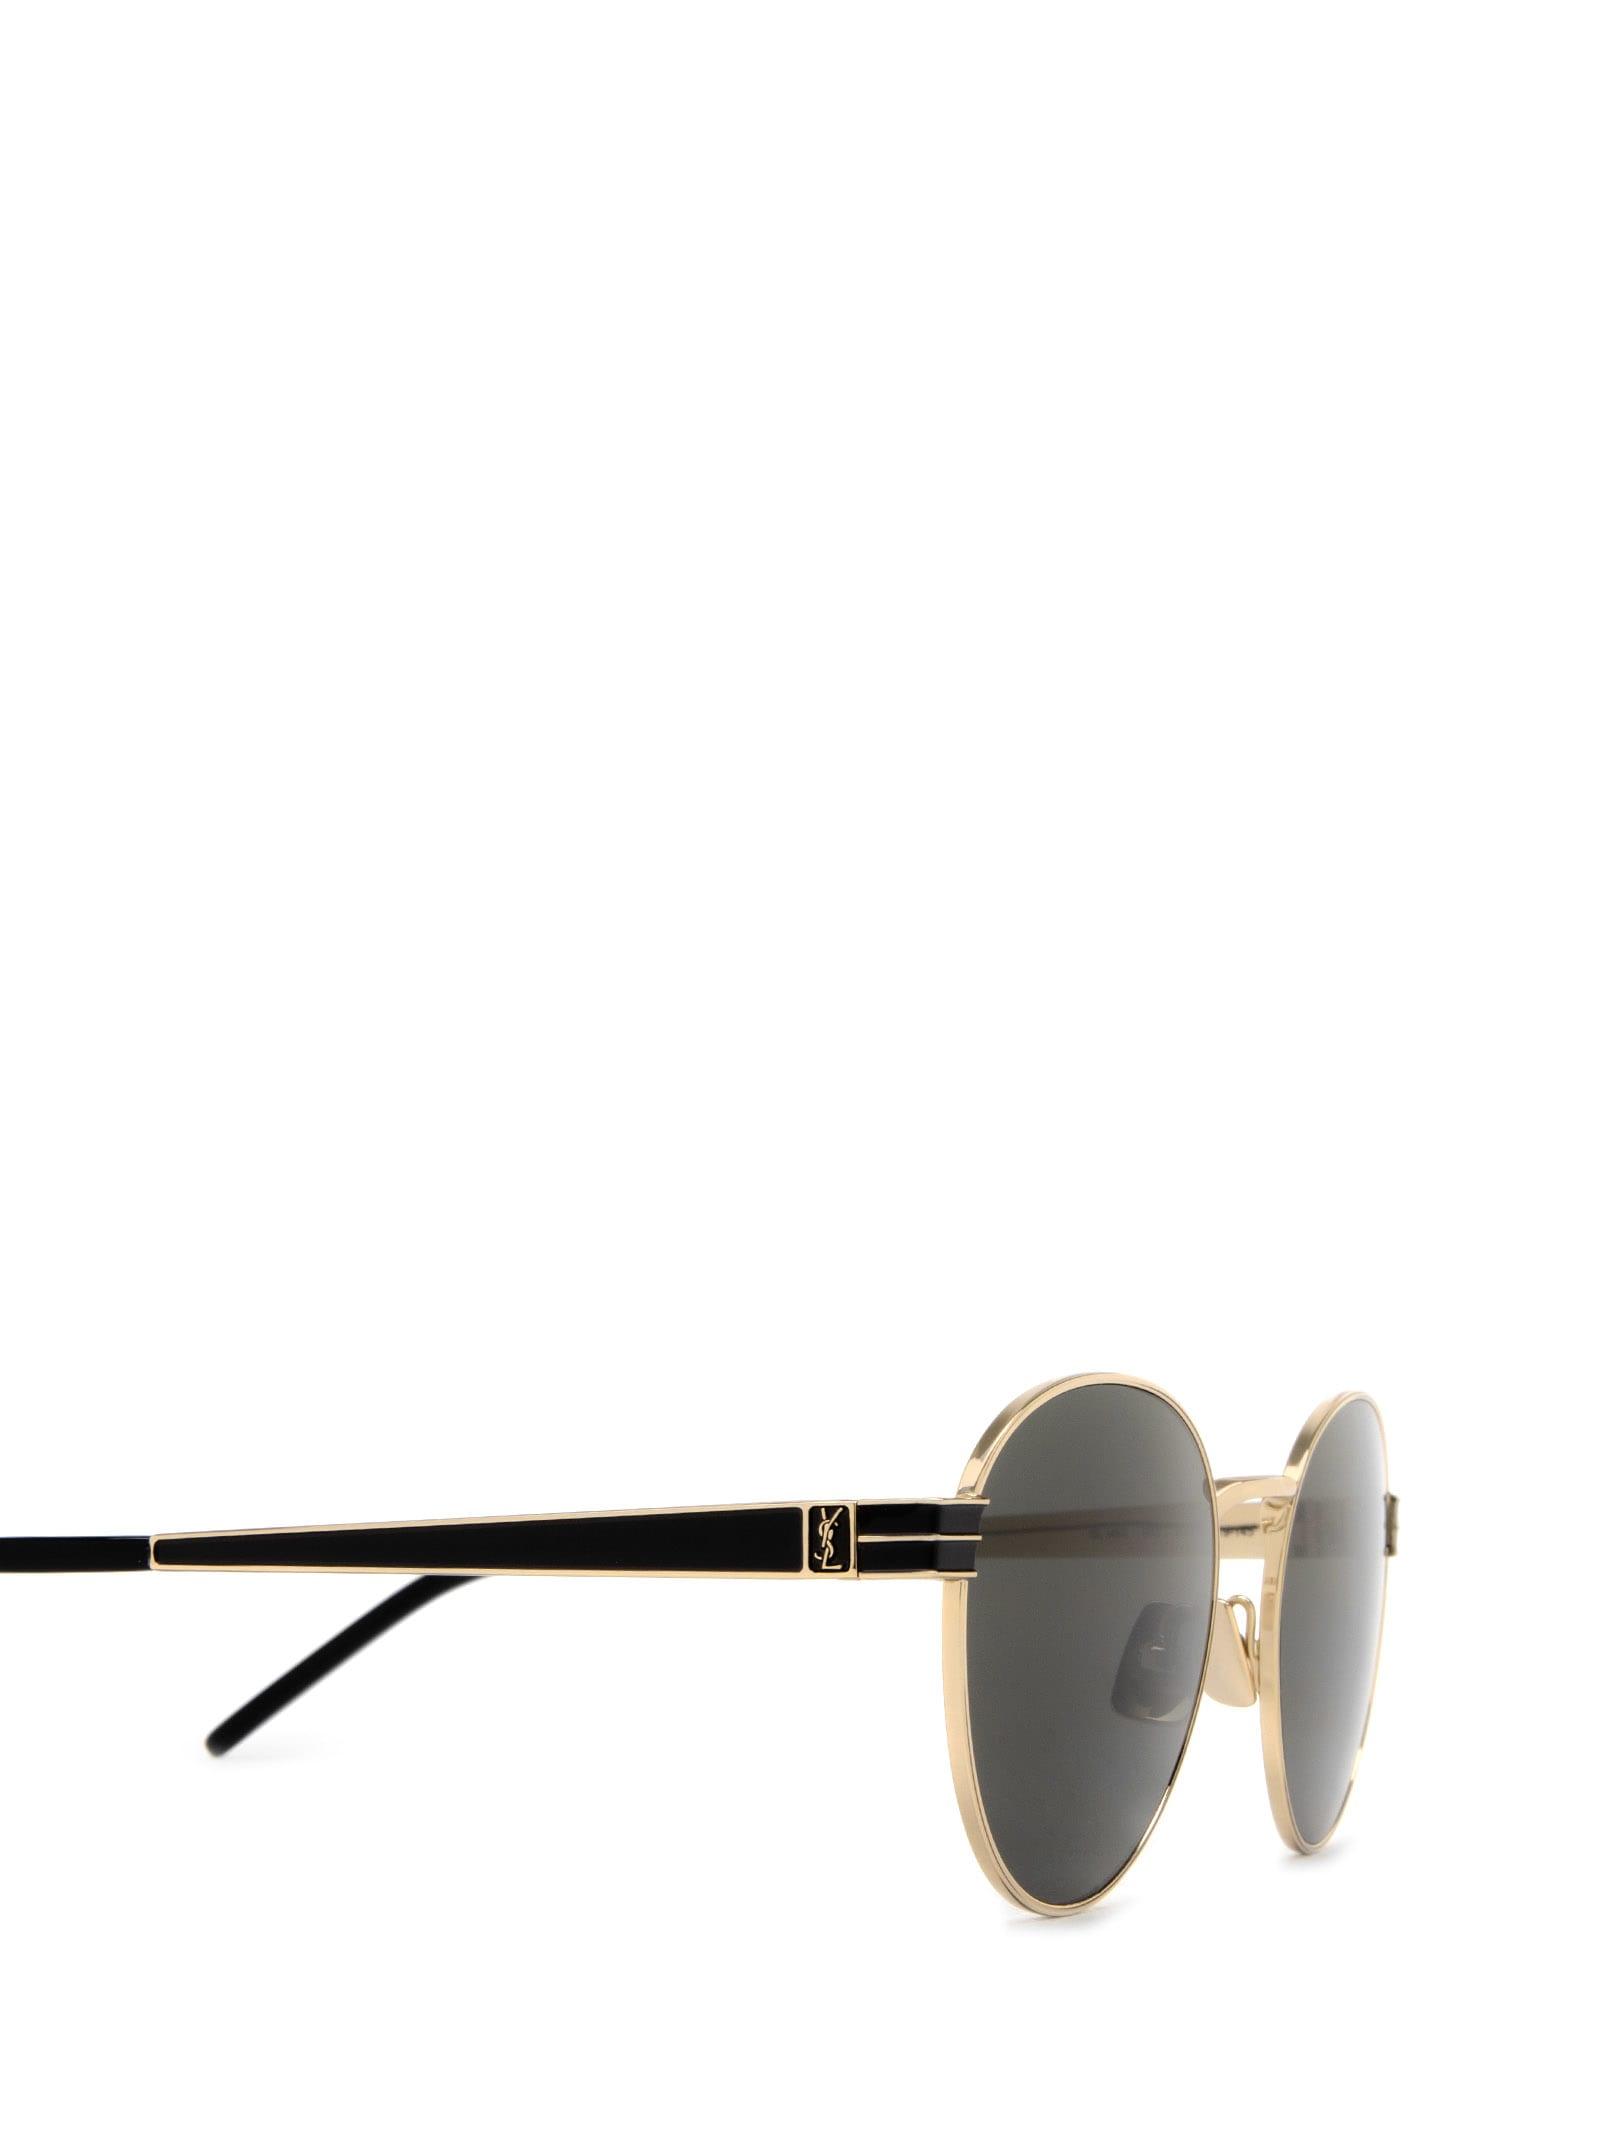 YSL Glasses and Sunglasses - EyeStyle - Official Blog of SmartBuyGlasses.co. uk